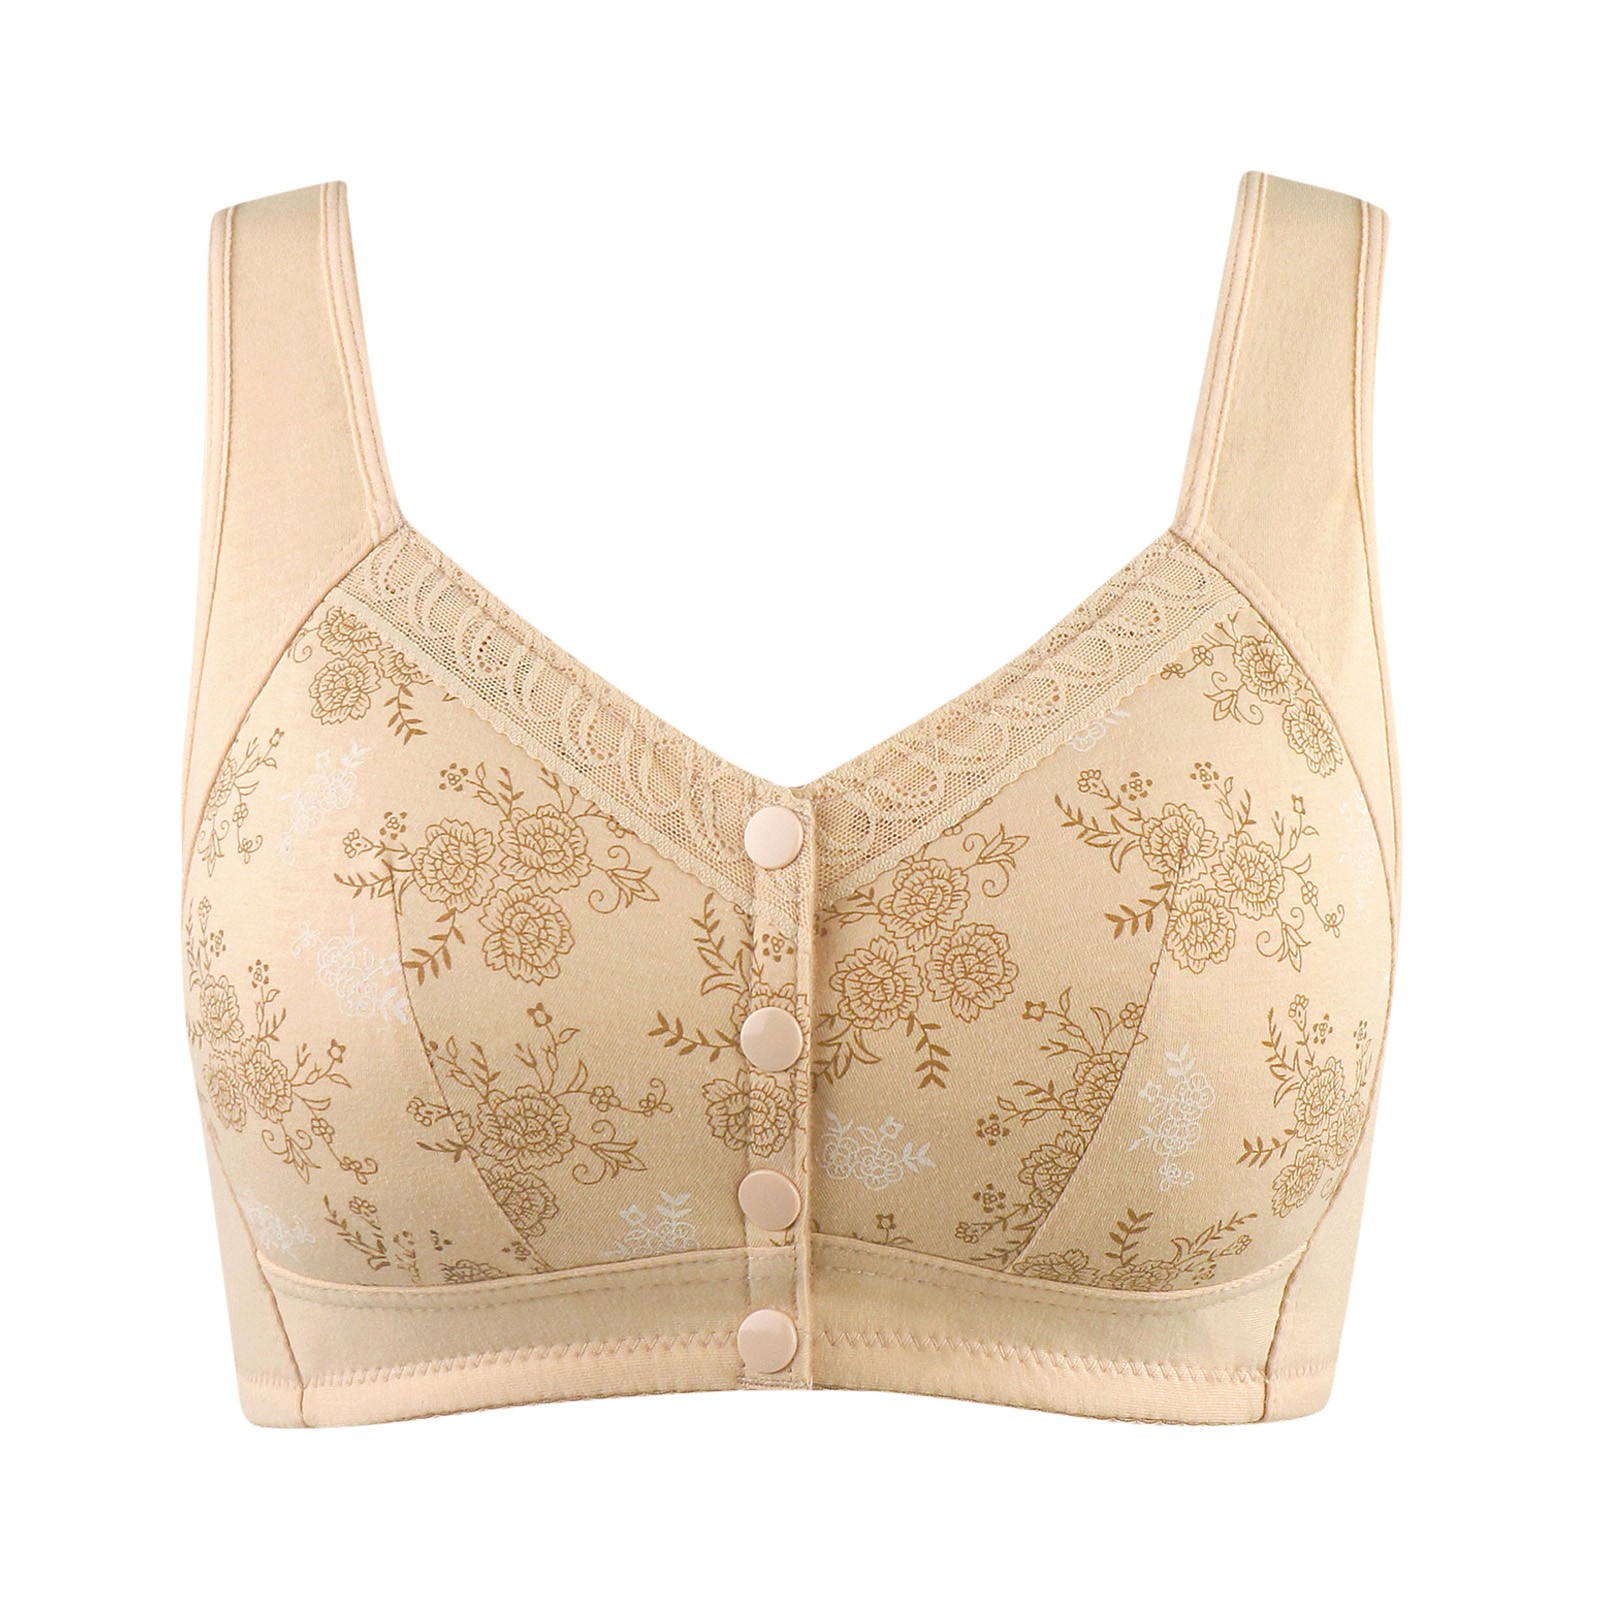 Lilgiuy Woman's Comfortable Lace Breathable Bra Underwear No Rims for Post-op - image 2 of 5